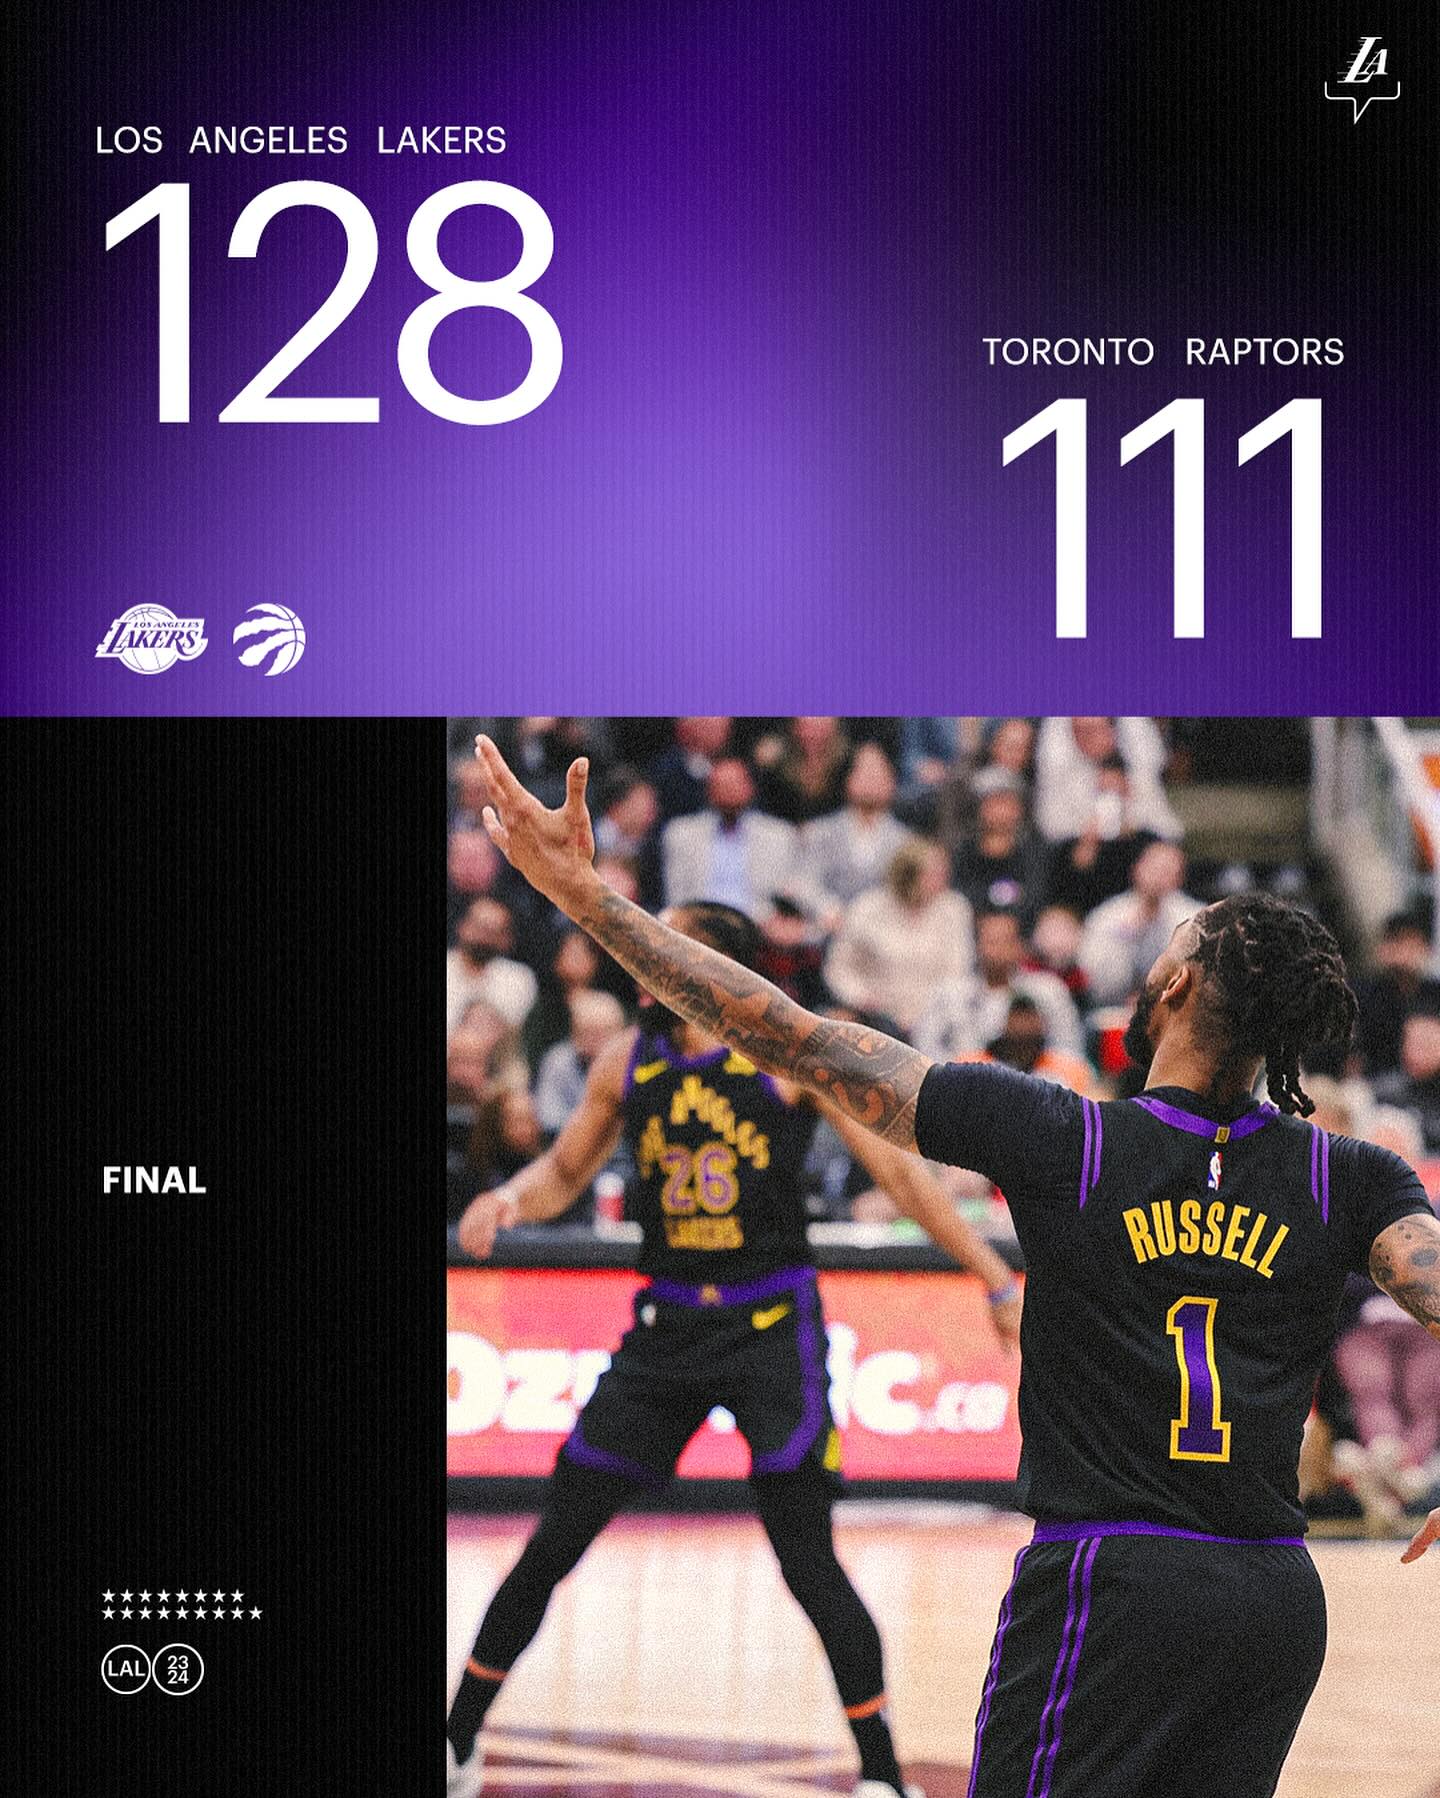 May be an image of ‎2 people, people playing basketball, crowd and ‎text that says "‎LOS ANGELES LAKERS 128 LAKERS TORONTO RAPTORS 111 FINAL MAw د RUSSELL 1‎"‎‎